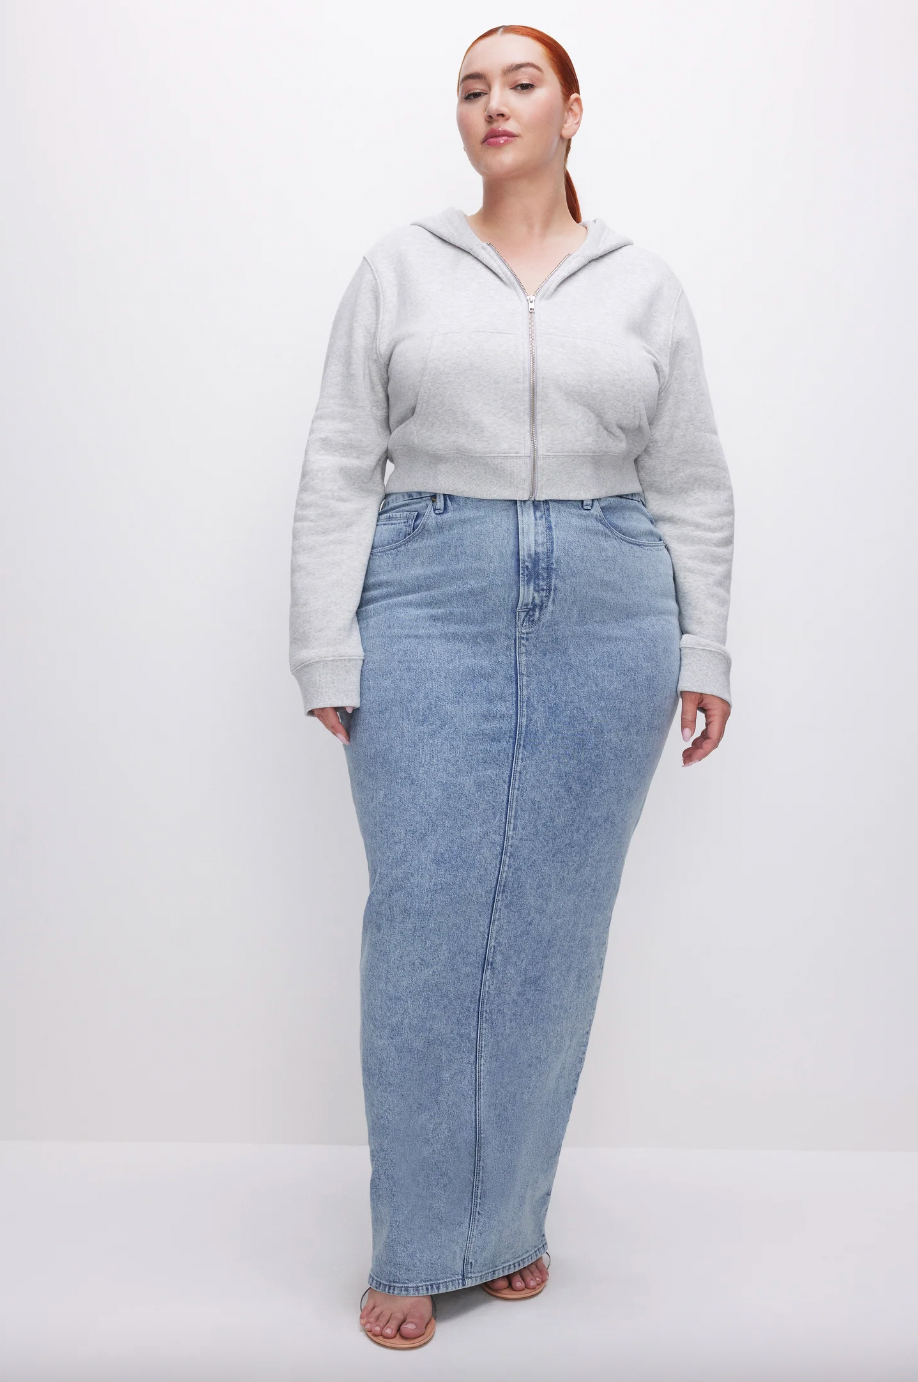 Women's Skirts | Just Jeans